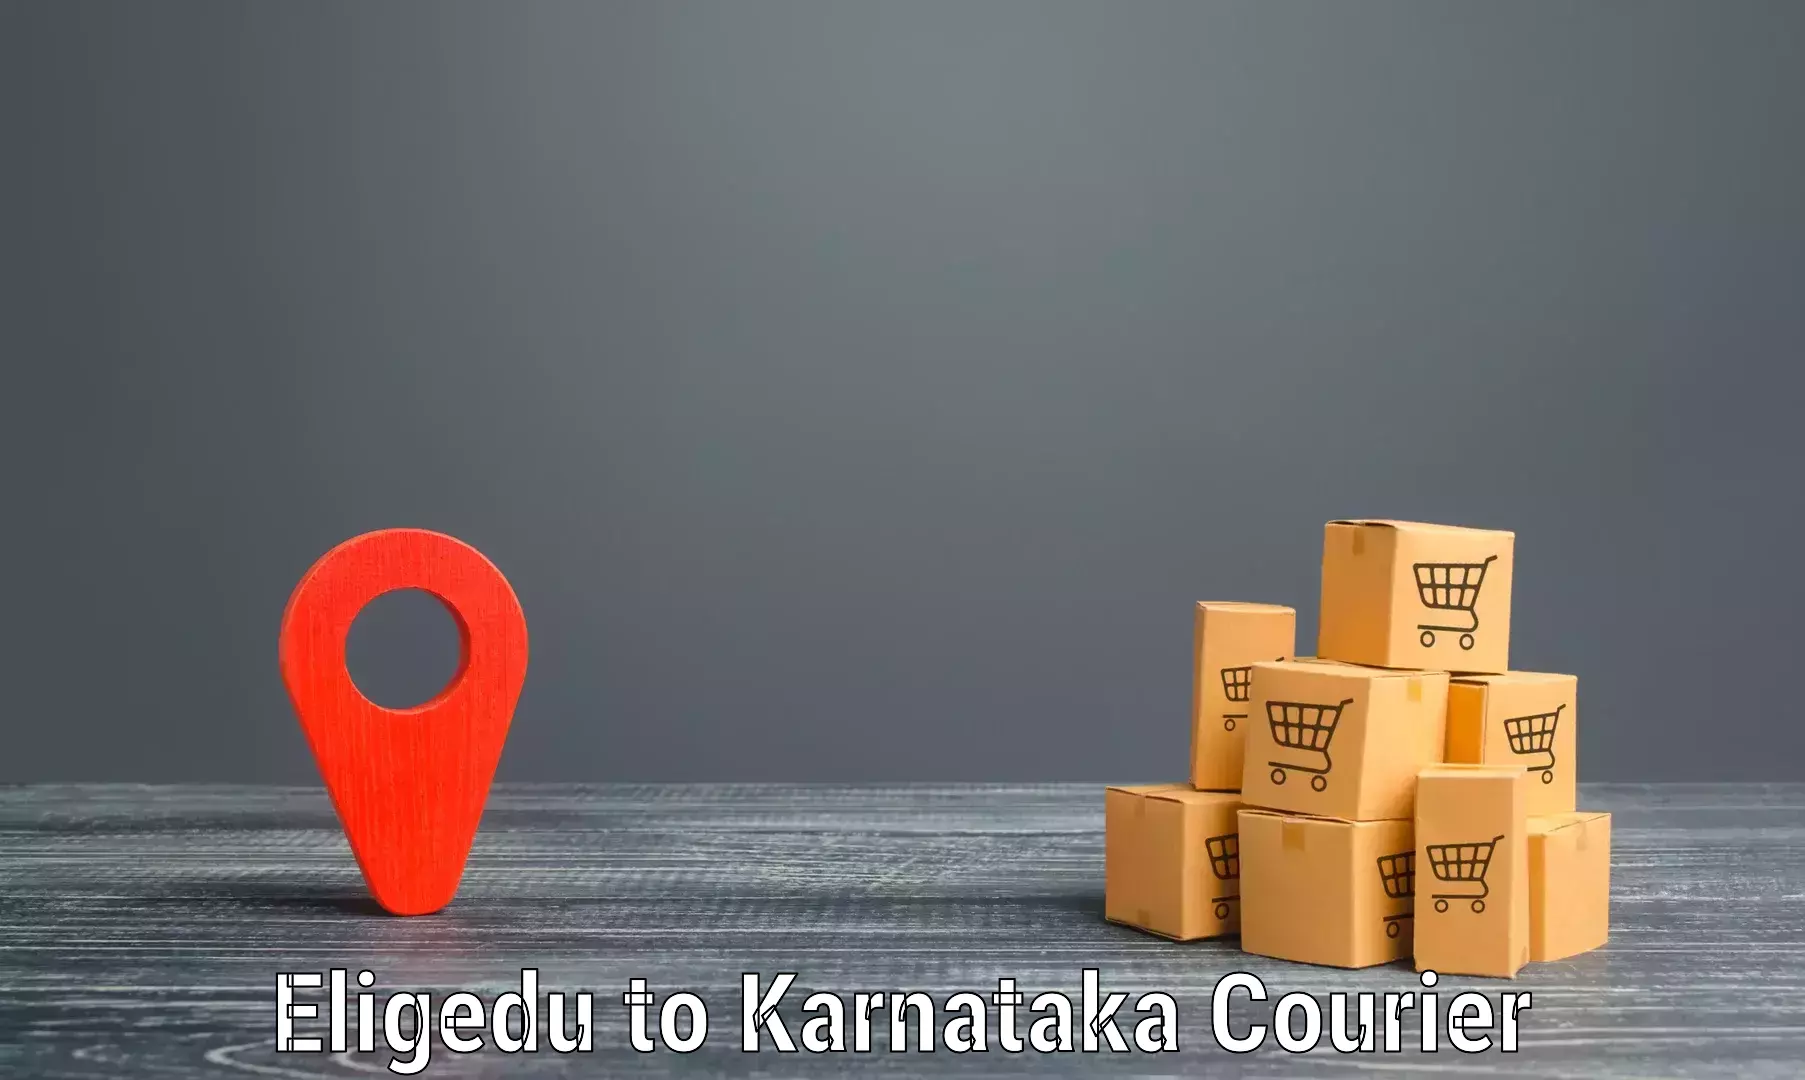 High-capacity courier solutions Eligedu to Ullal